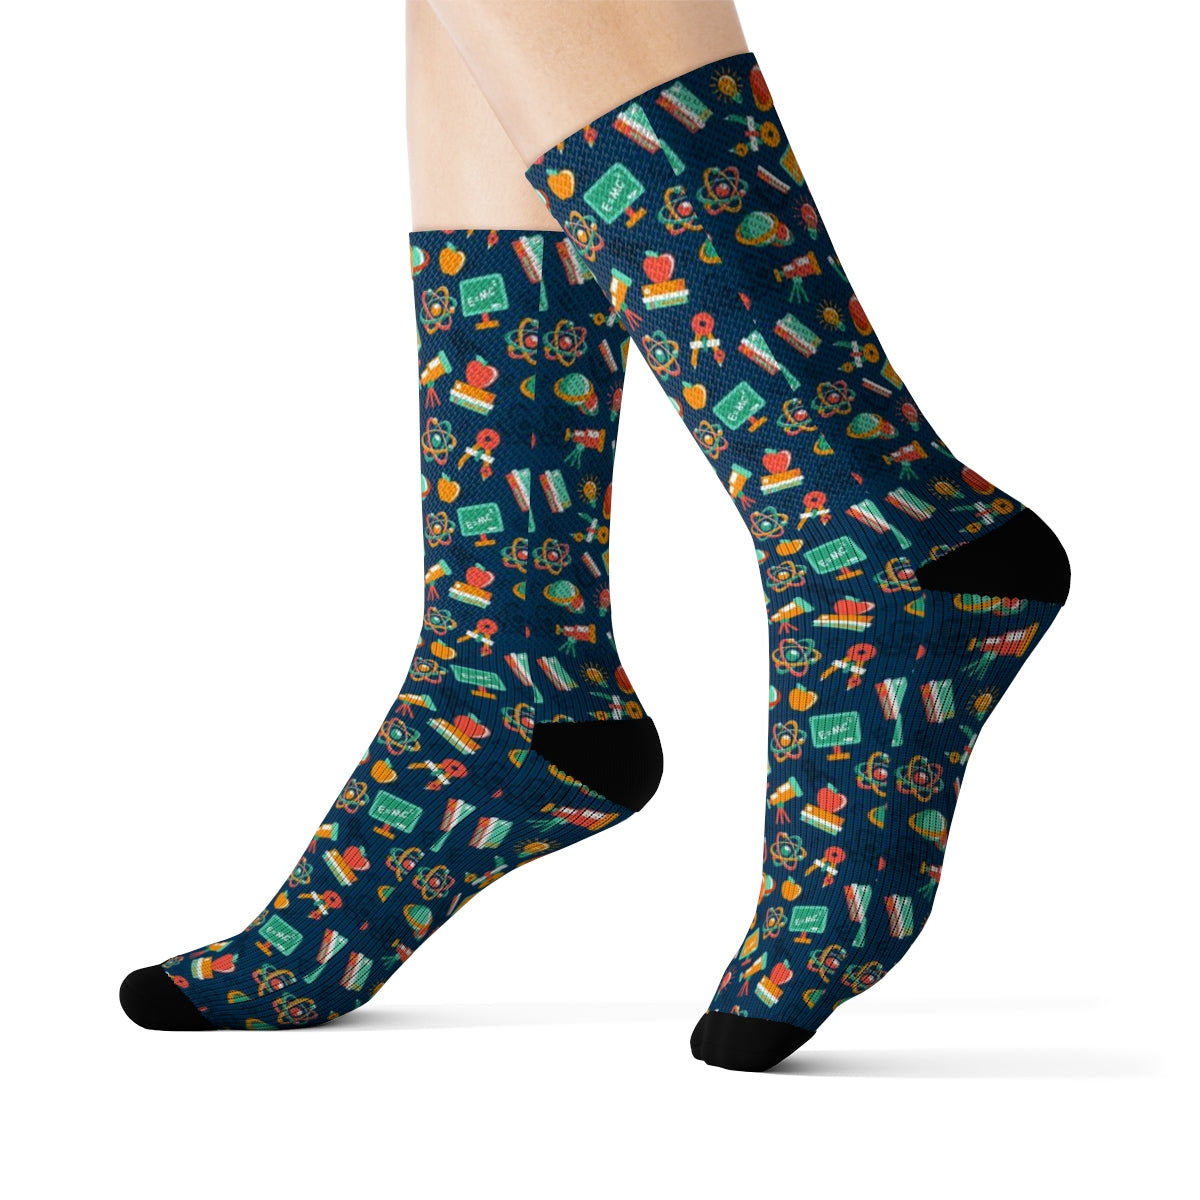 Science Physics Socks, Blue 3D Printed Sublimation DNA Molecule Microscope Women Men Funny Fun Novelty Cool Funky Crazy Unique Gift Starcove Fashion